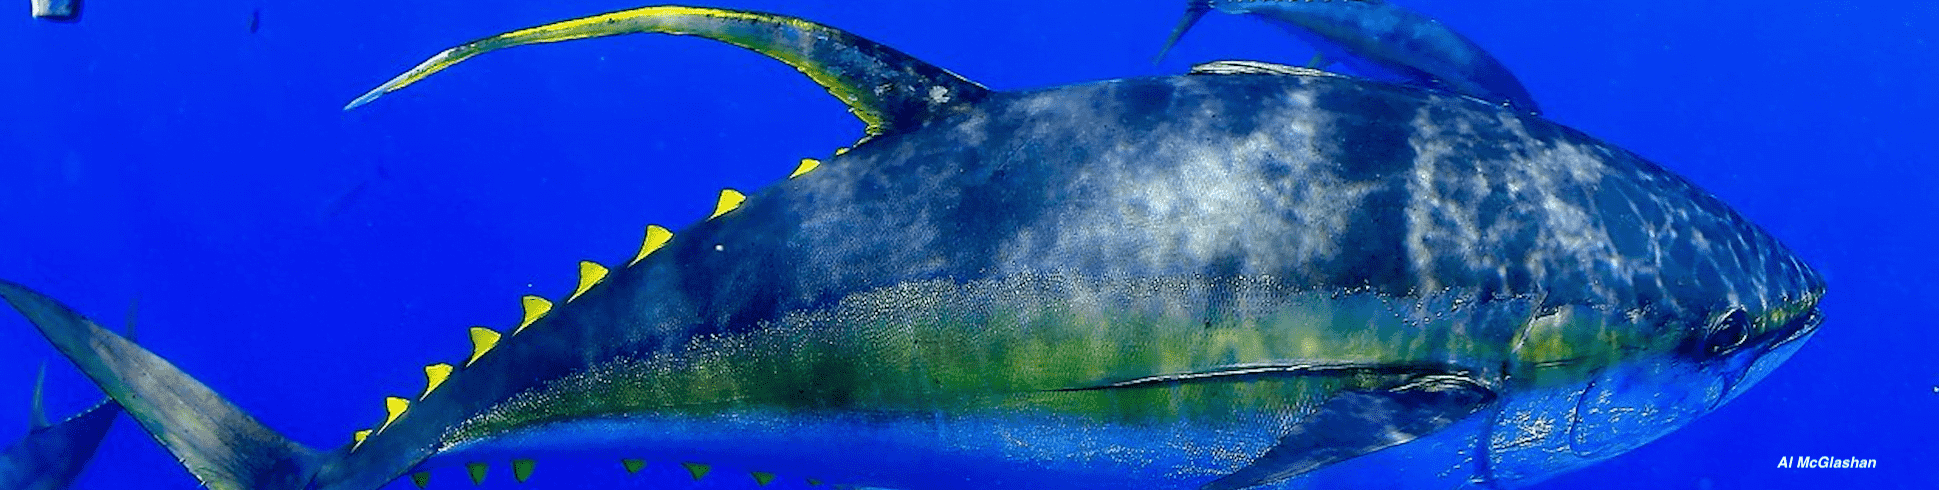 IOTC adopts resolution to rebuild yellowfin tuna stock, but NGOs question its effectiveness